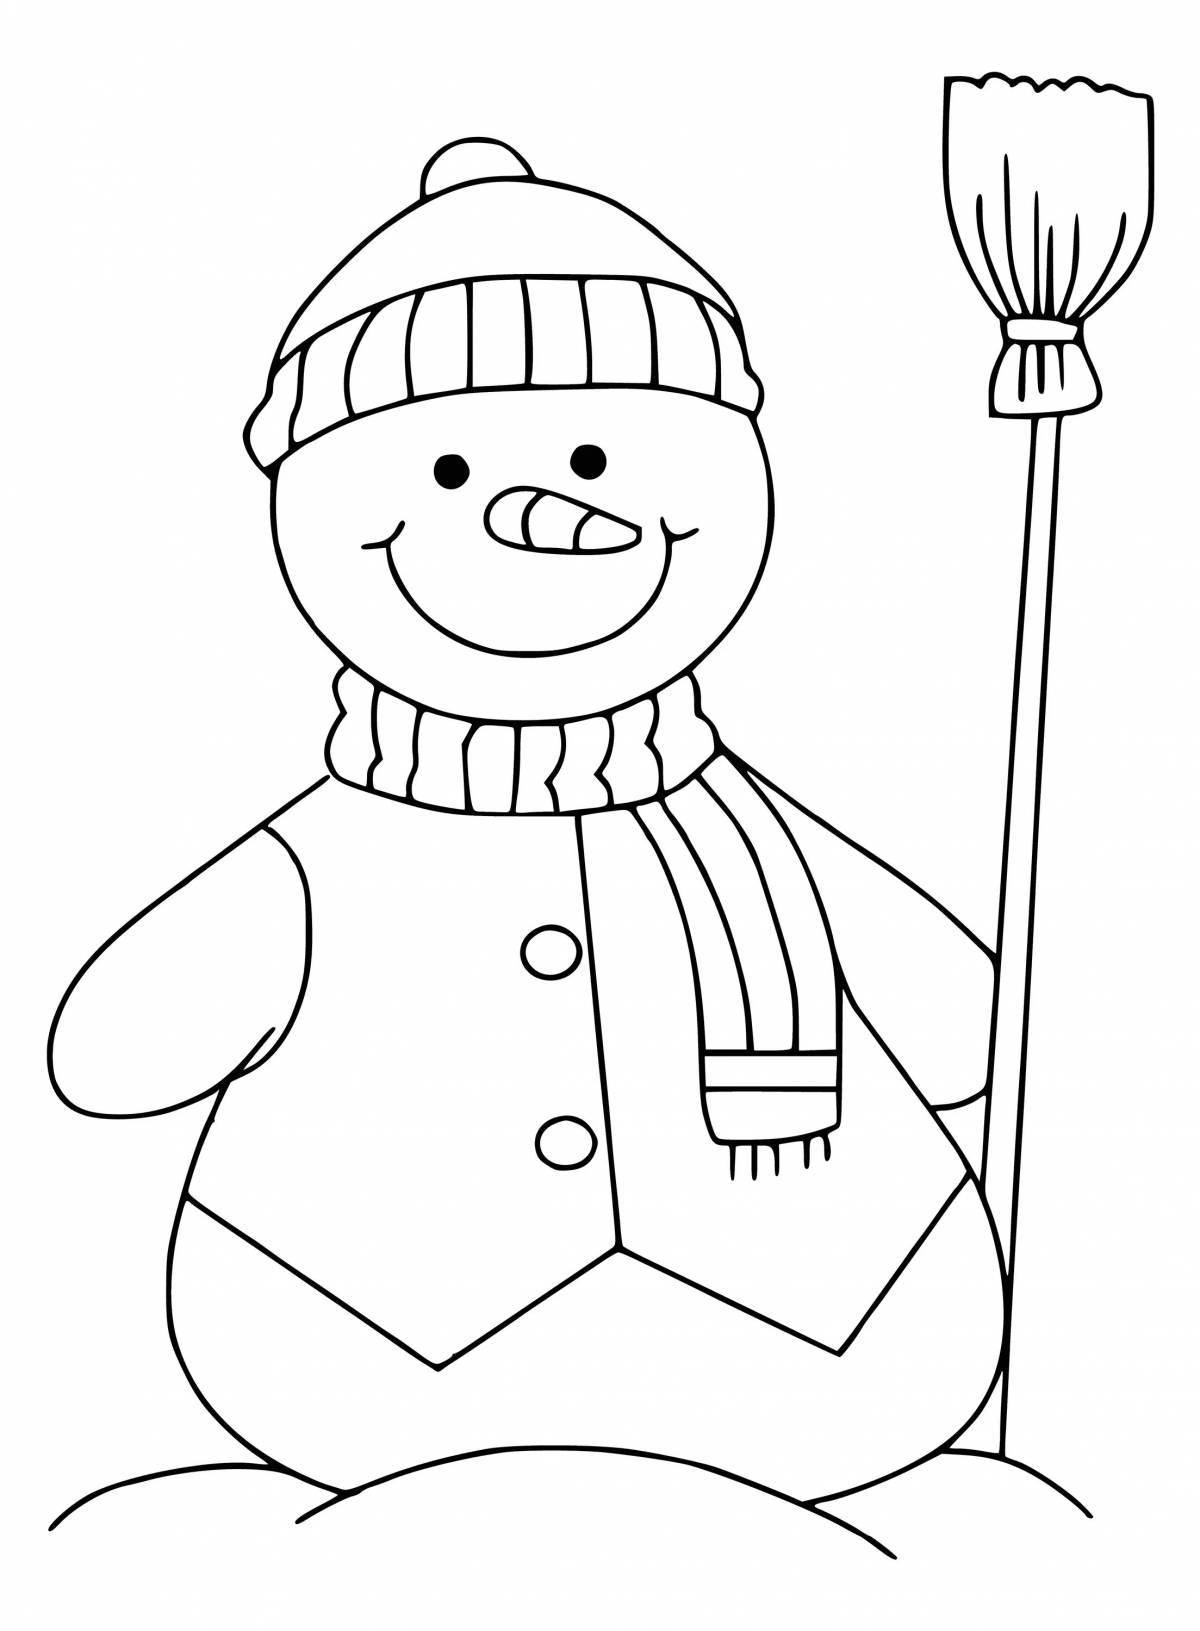 Cheerful children's snowman coloring page